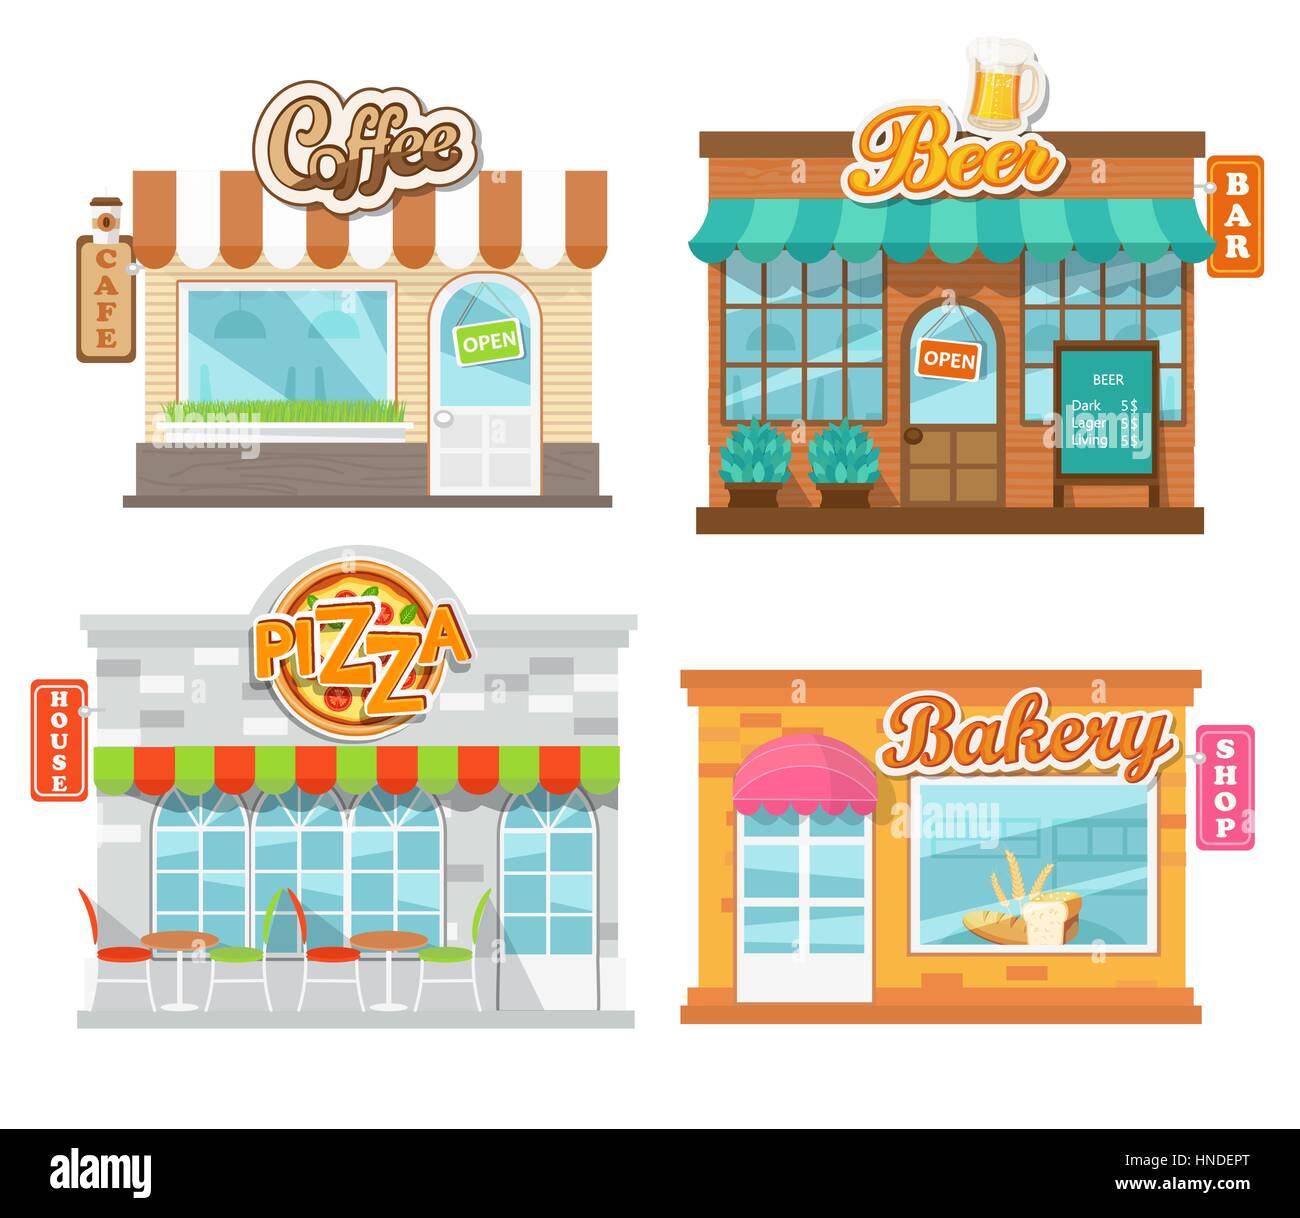 Vector illustration flat cafes and shop: pizza house, beer bar, coffee cafe and bakery shop. Stock Vector